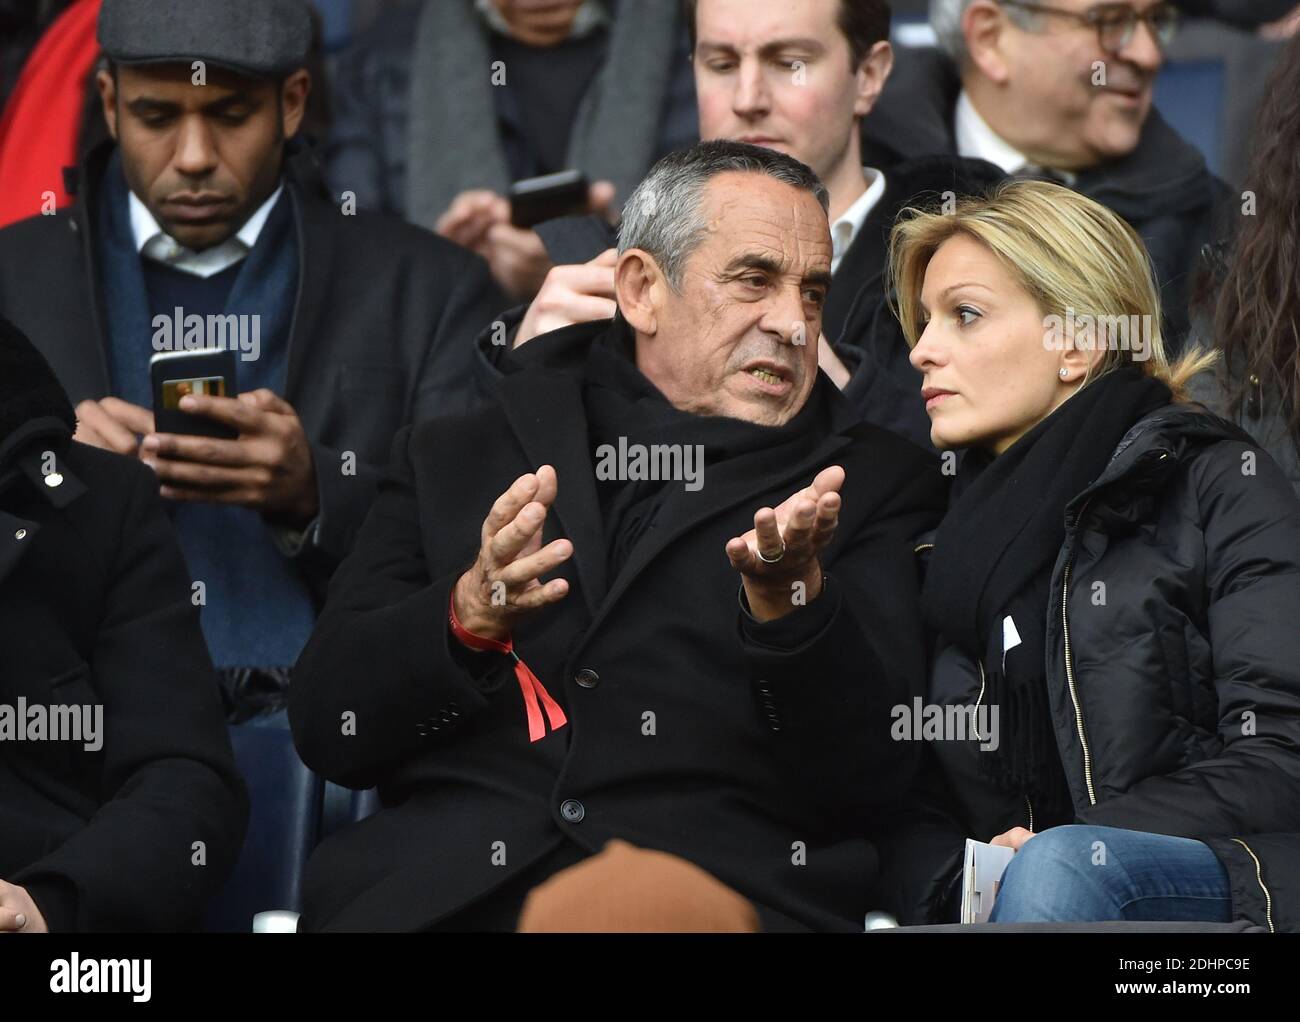 Loup-Denis Elion, TThierry Ardisson and his wife Audrey Crespo-Mara attending the French First League (L1) football match between Paris Saint-Germain (PSG) and Reims at the Parc des Princes stadium in Paris, France on February 20, 2016. PSG won 4-1. Photo by Christian Liewig/ABACAPRESS.COM Stock Photo